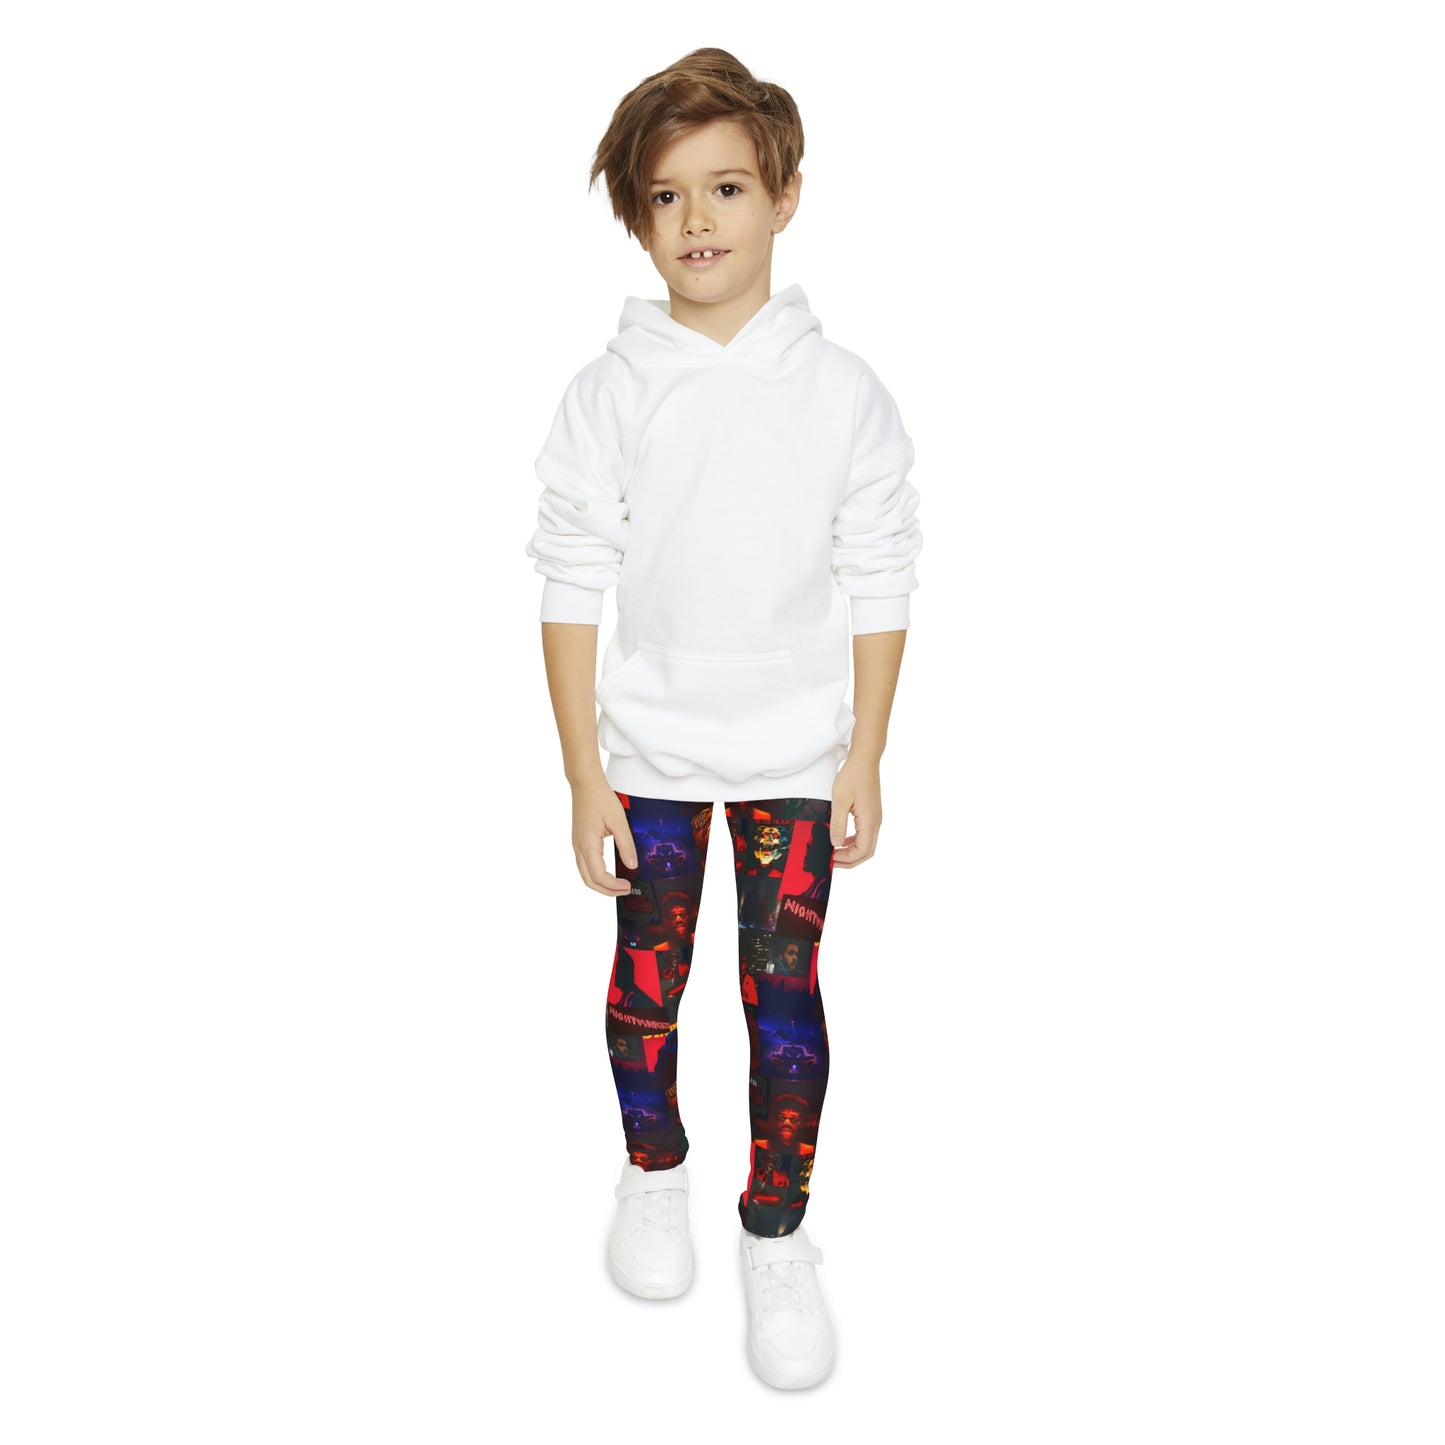 The Weeknd Heartless Nightmares Collage Youth Full-Length Leggings